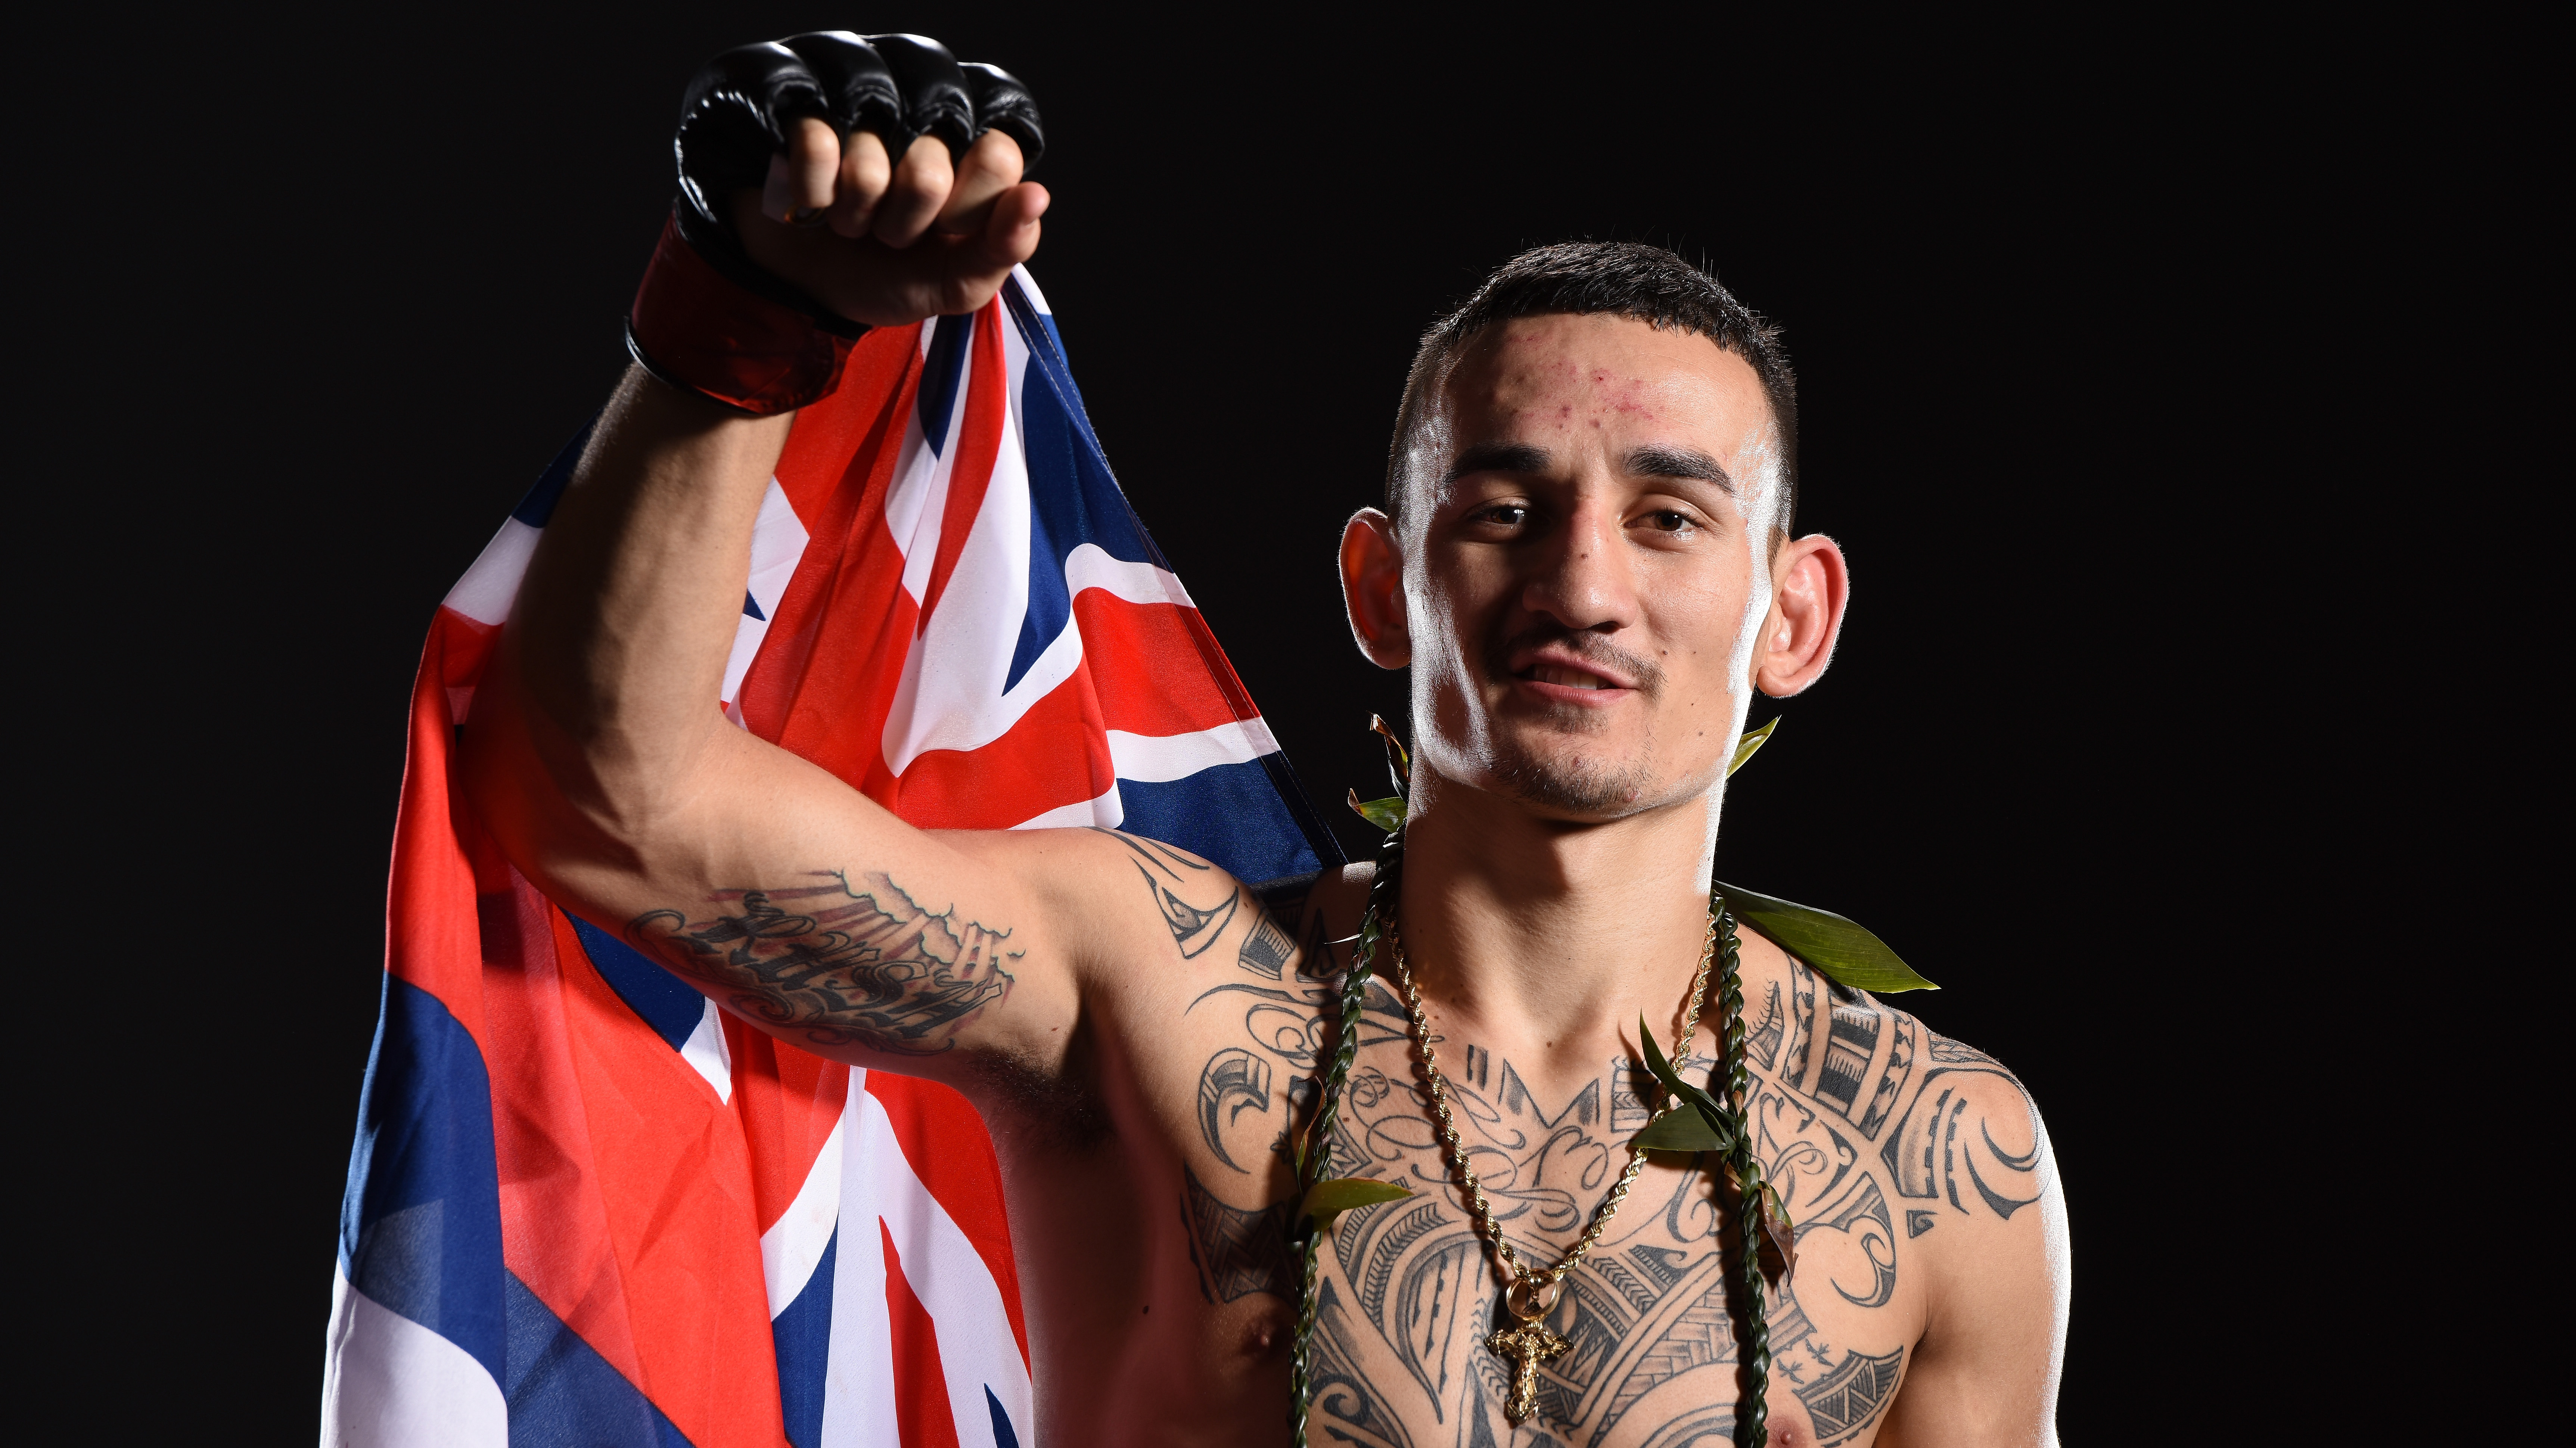 Max Holloway puts his win streak on the line when he fights for the interim featherweight title against Anthony Pettis at UFC 206 Saturday